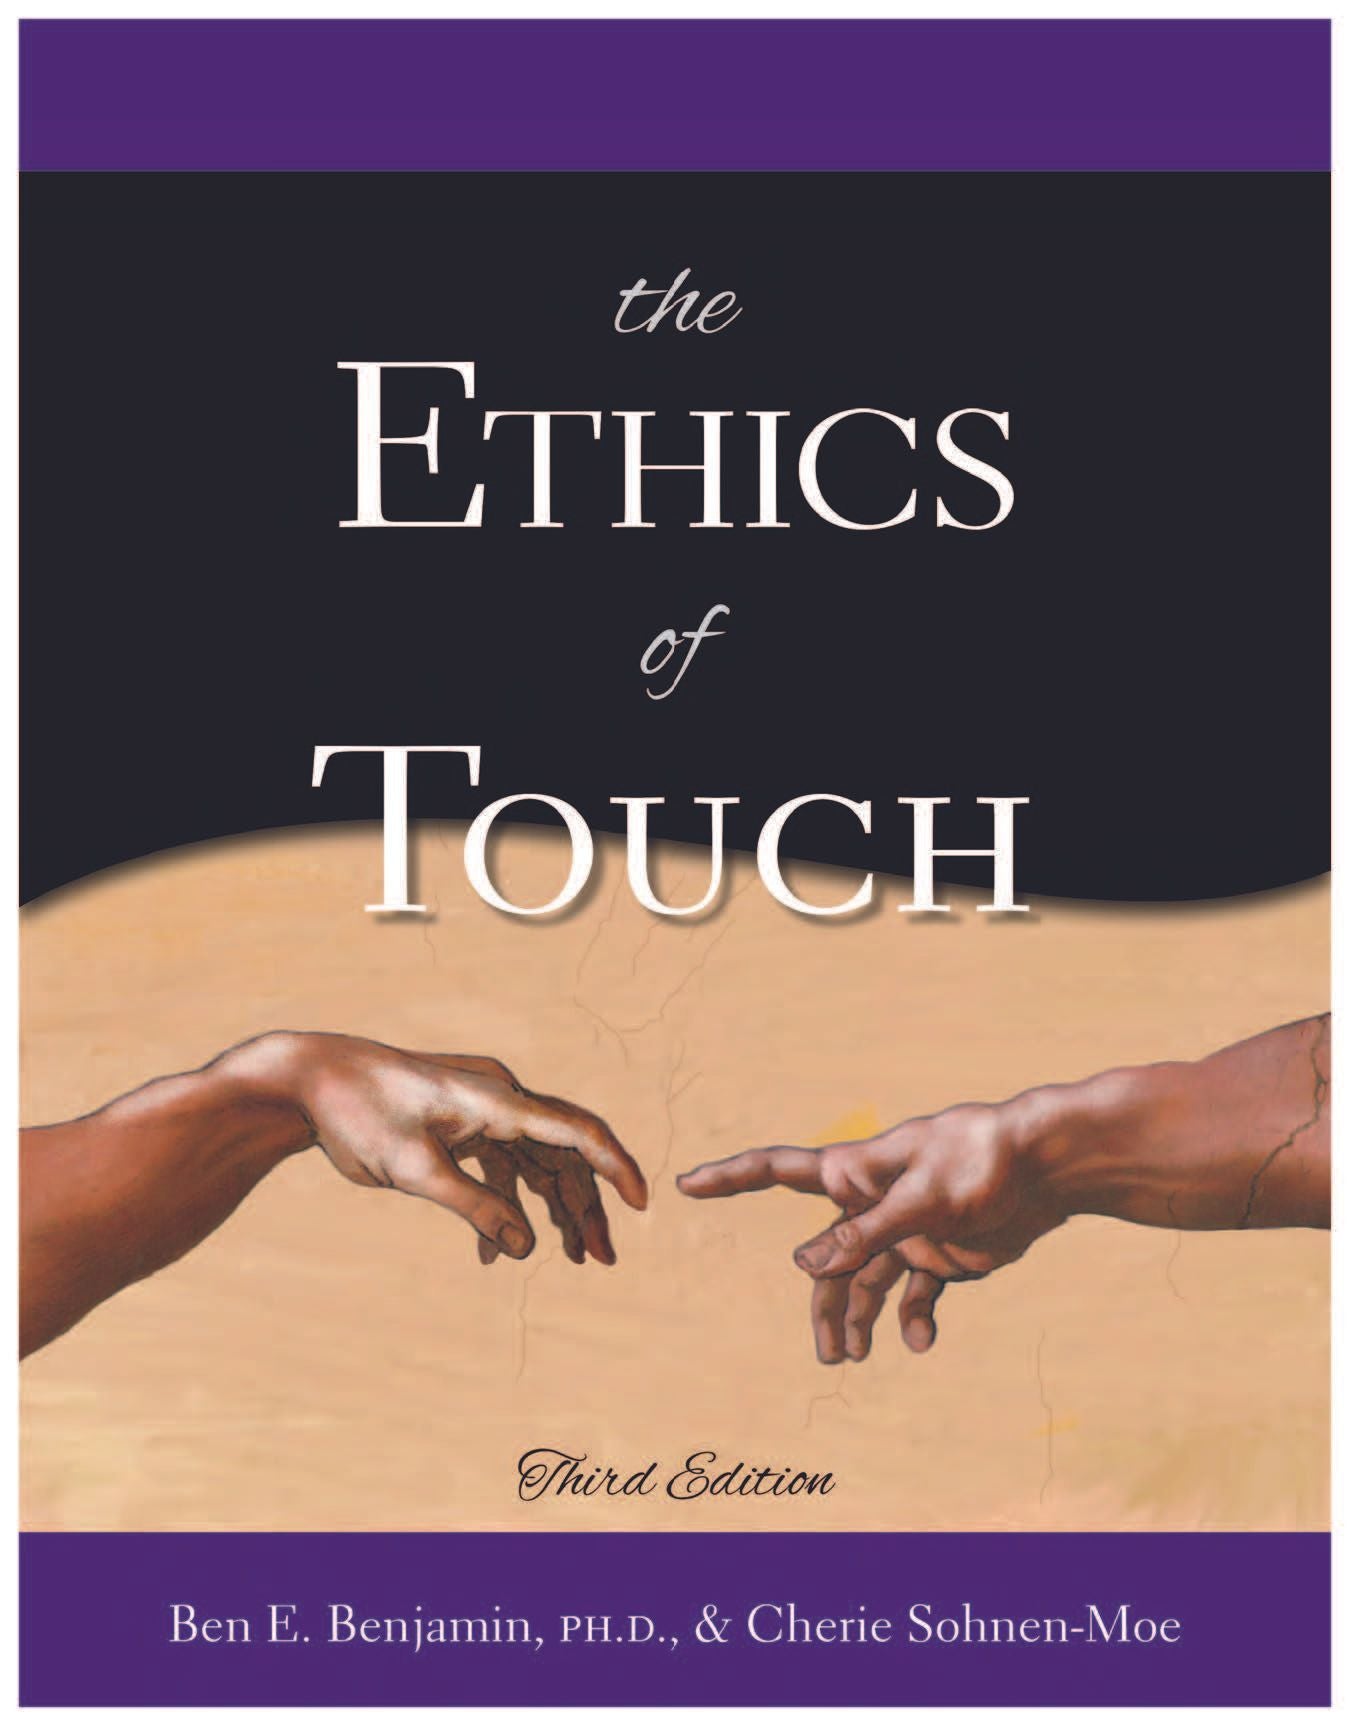 The Ethics of Touch - 3rd Edition